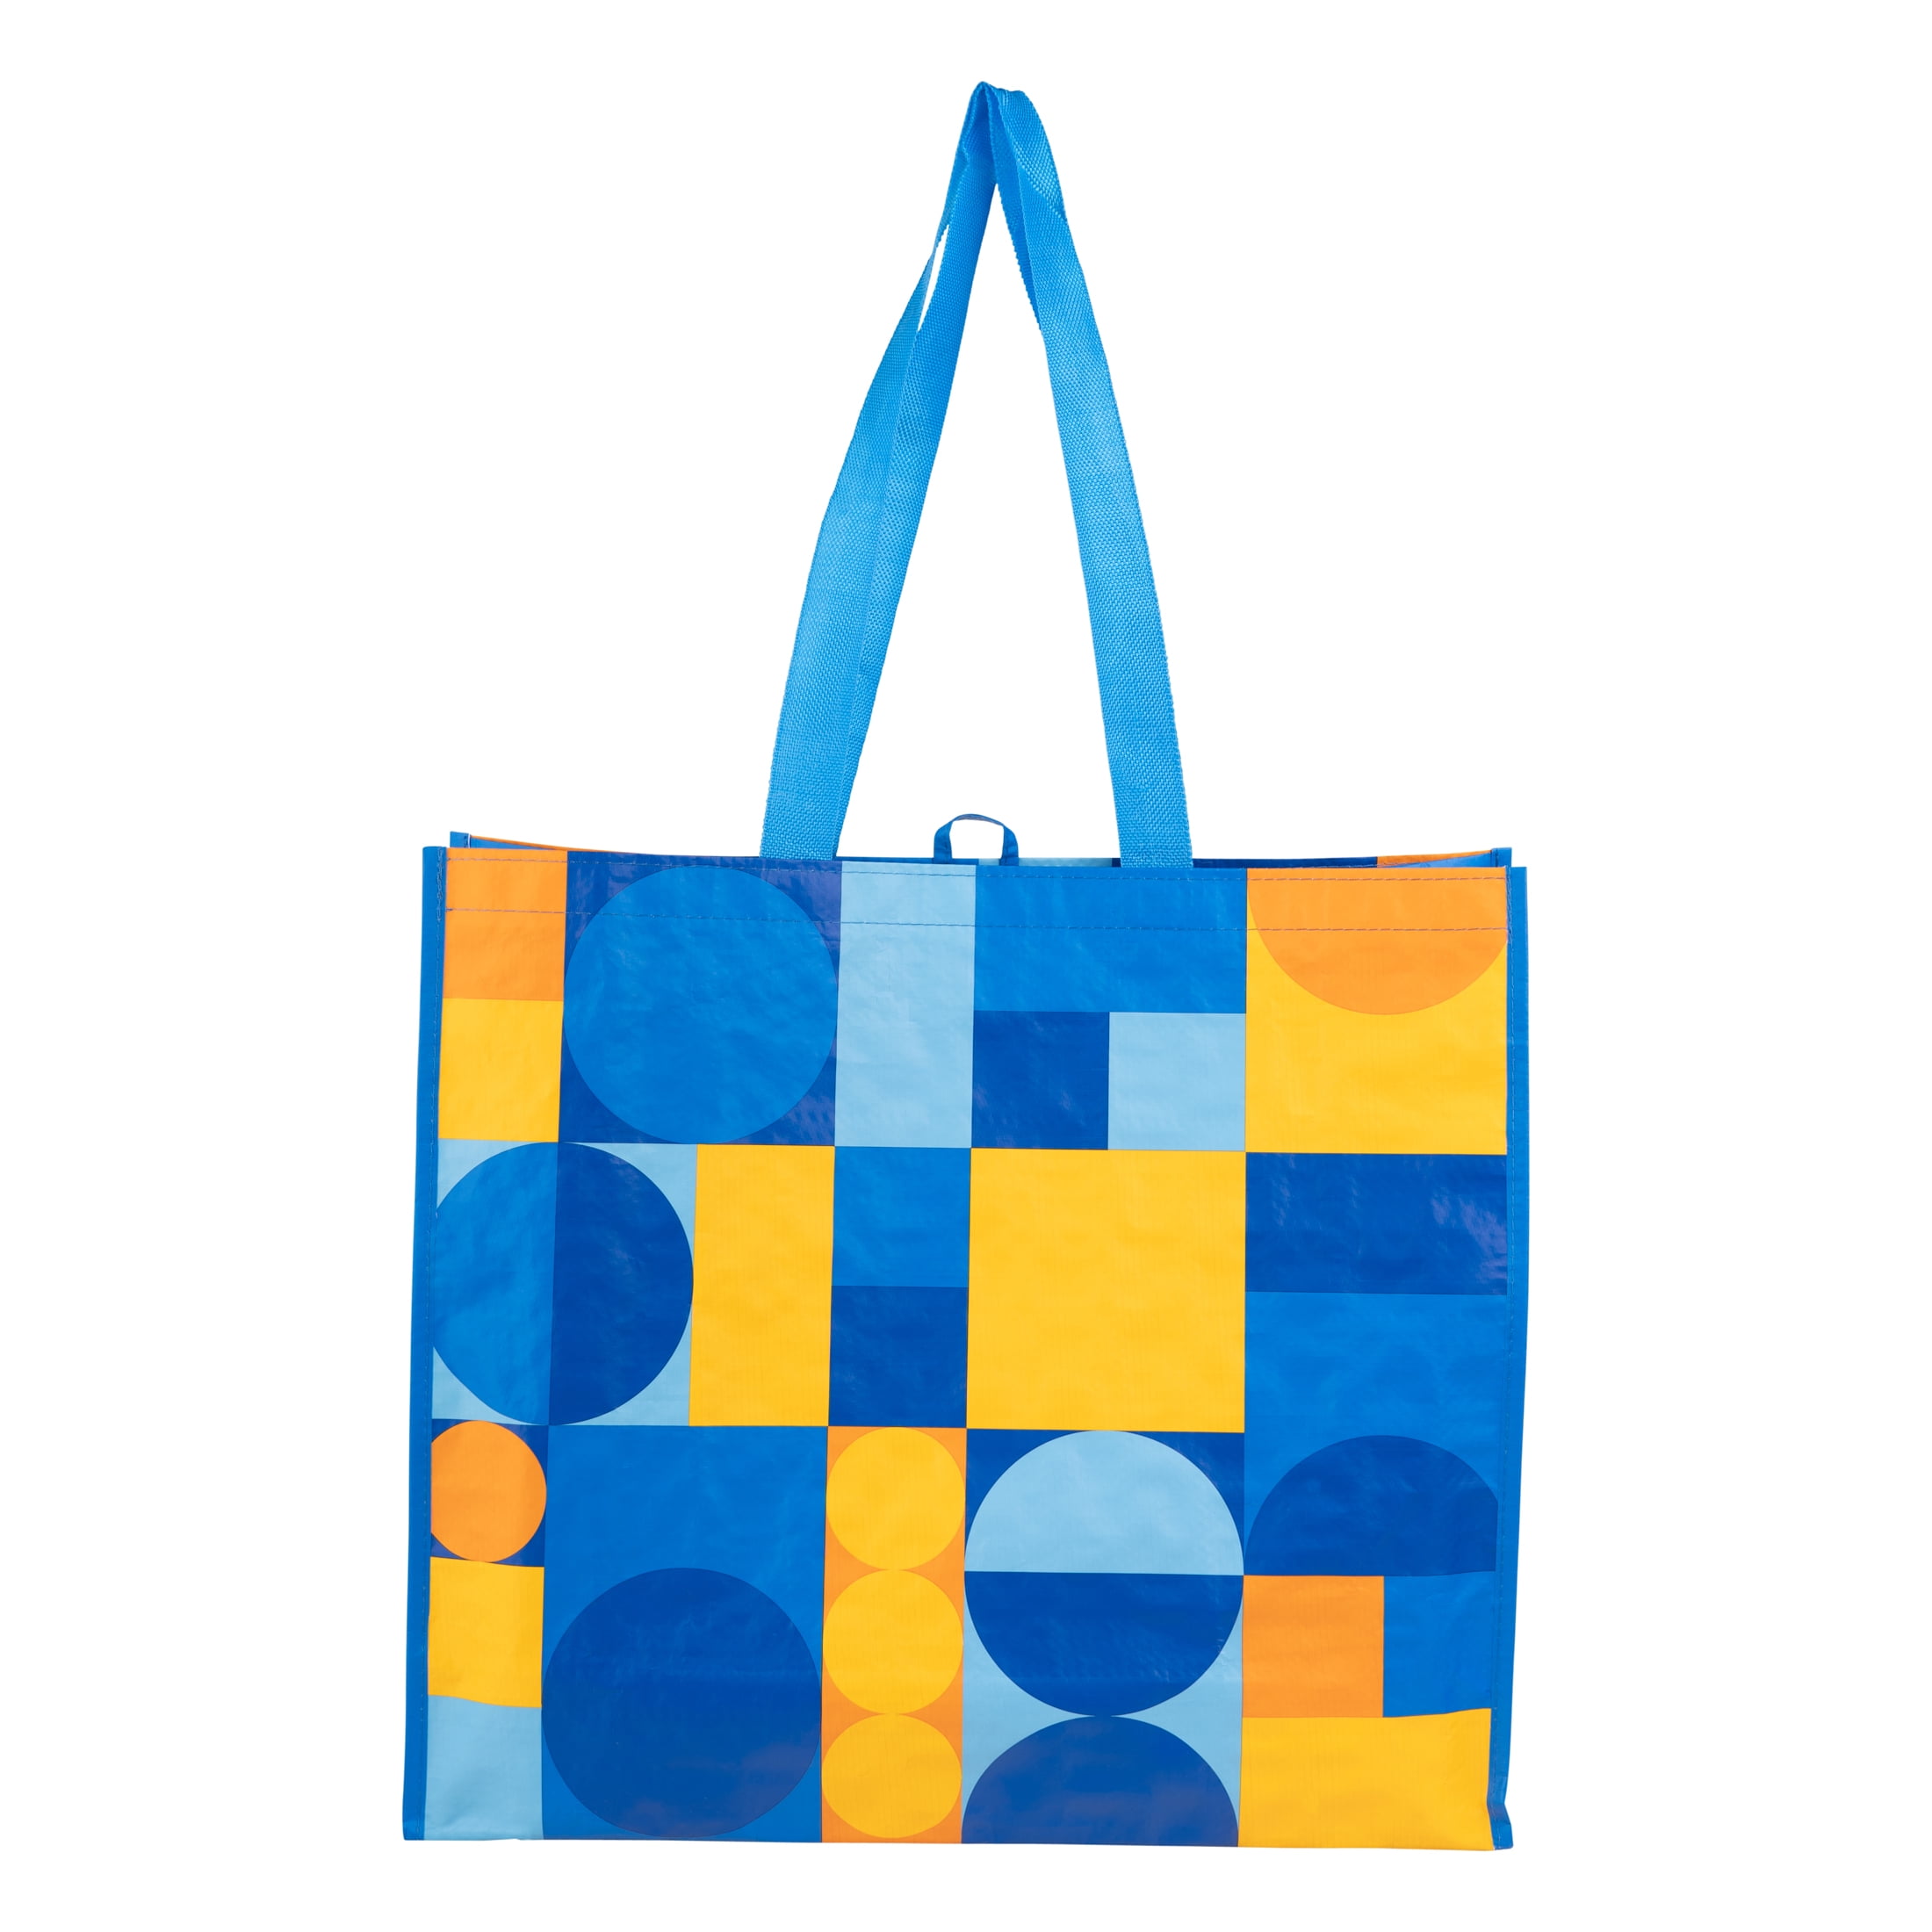 Don't throw away your shopping bags! Let's make a cute tote bag! Getti